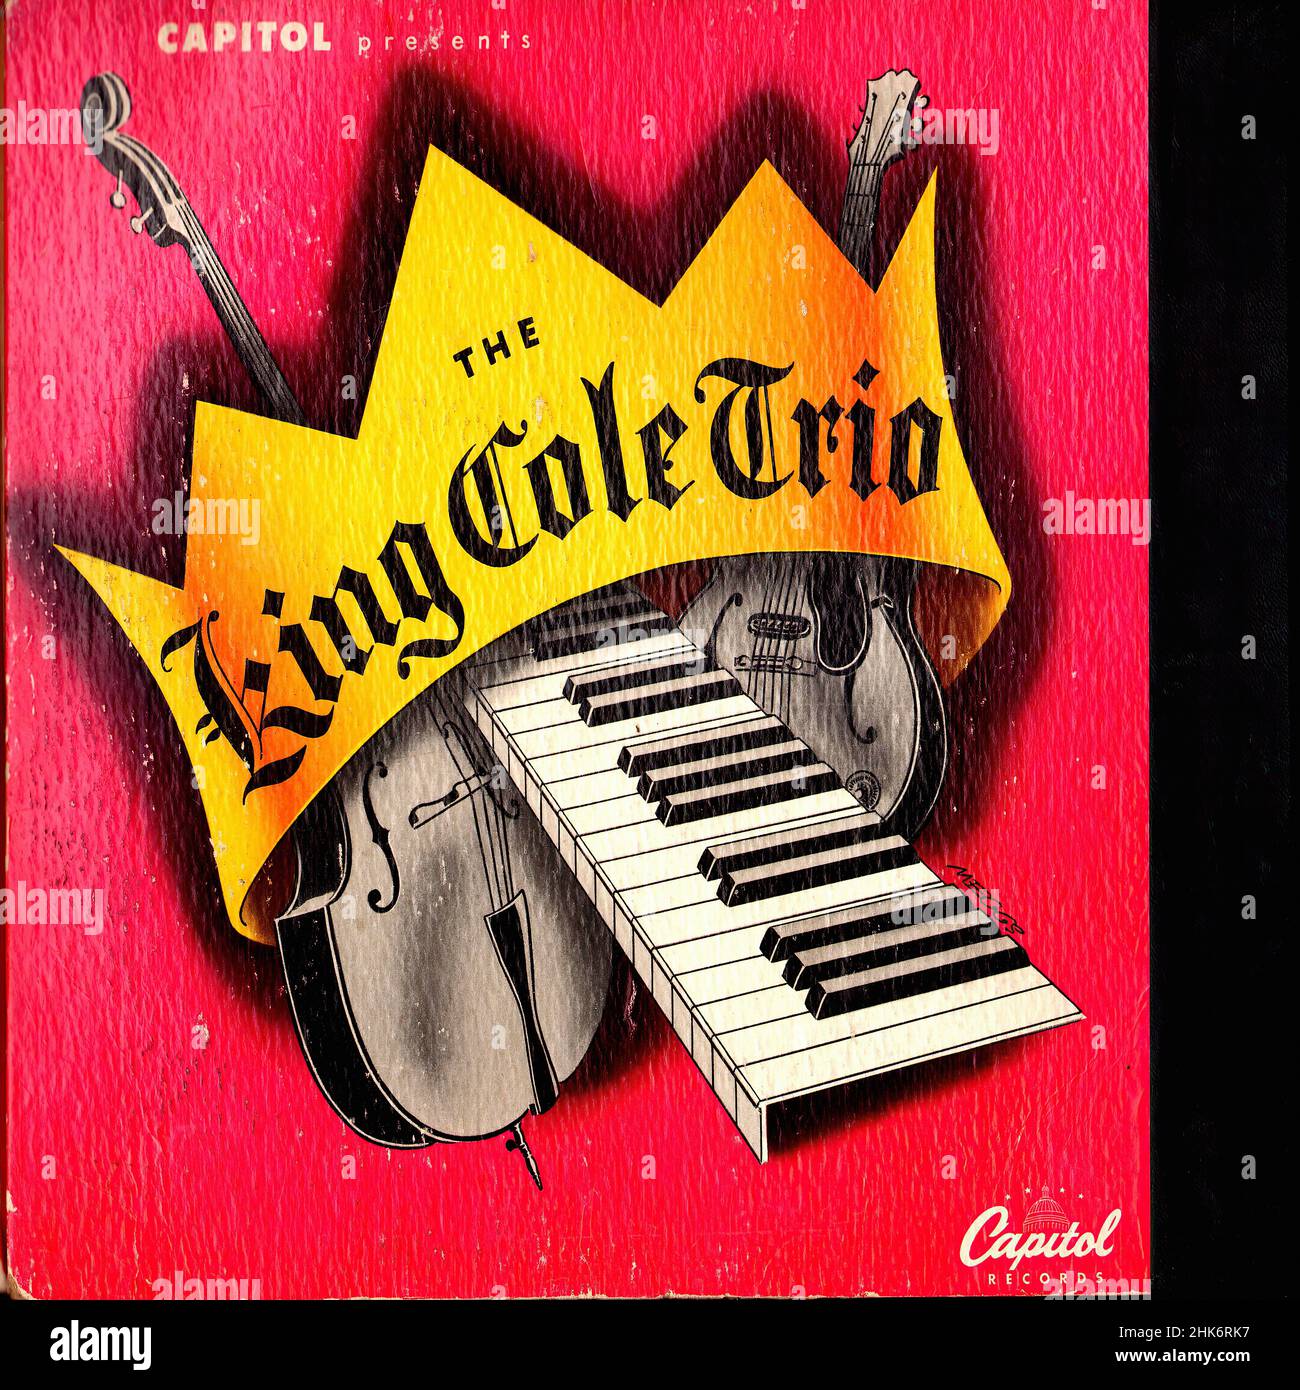 Vintage vinyl record cover - King Cole Trio, The - Capitol - 4 Records  Box with 78RPM Shellacs - US - 1944-P1 k 01 Stock Photo